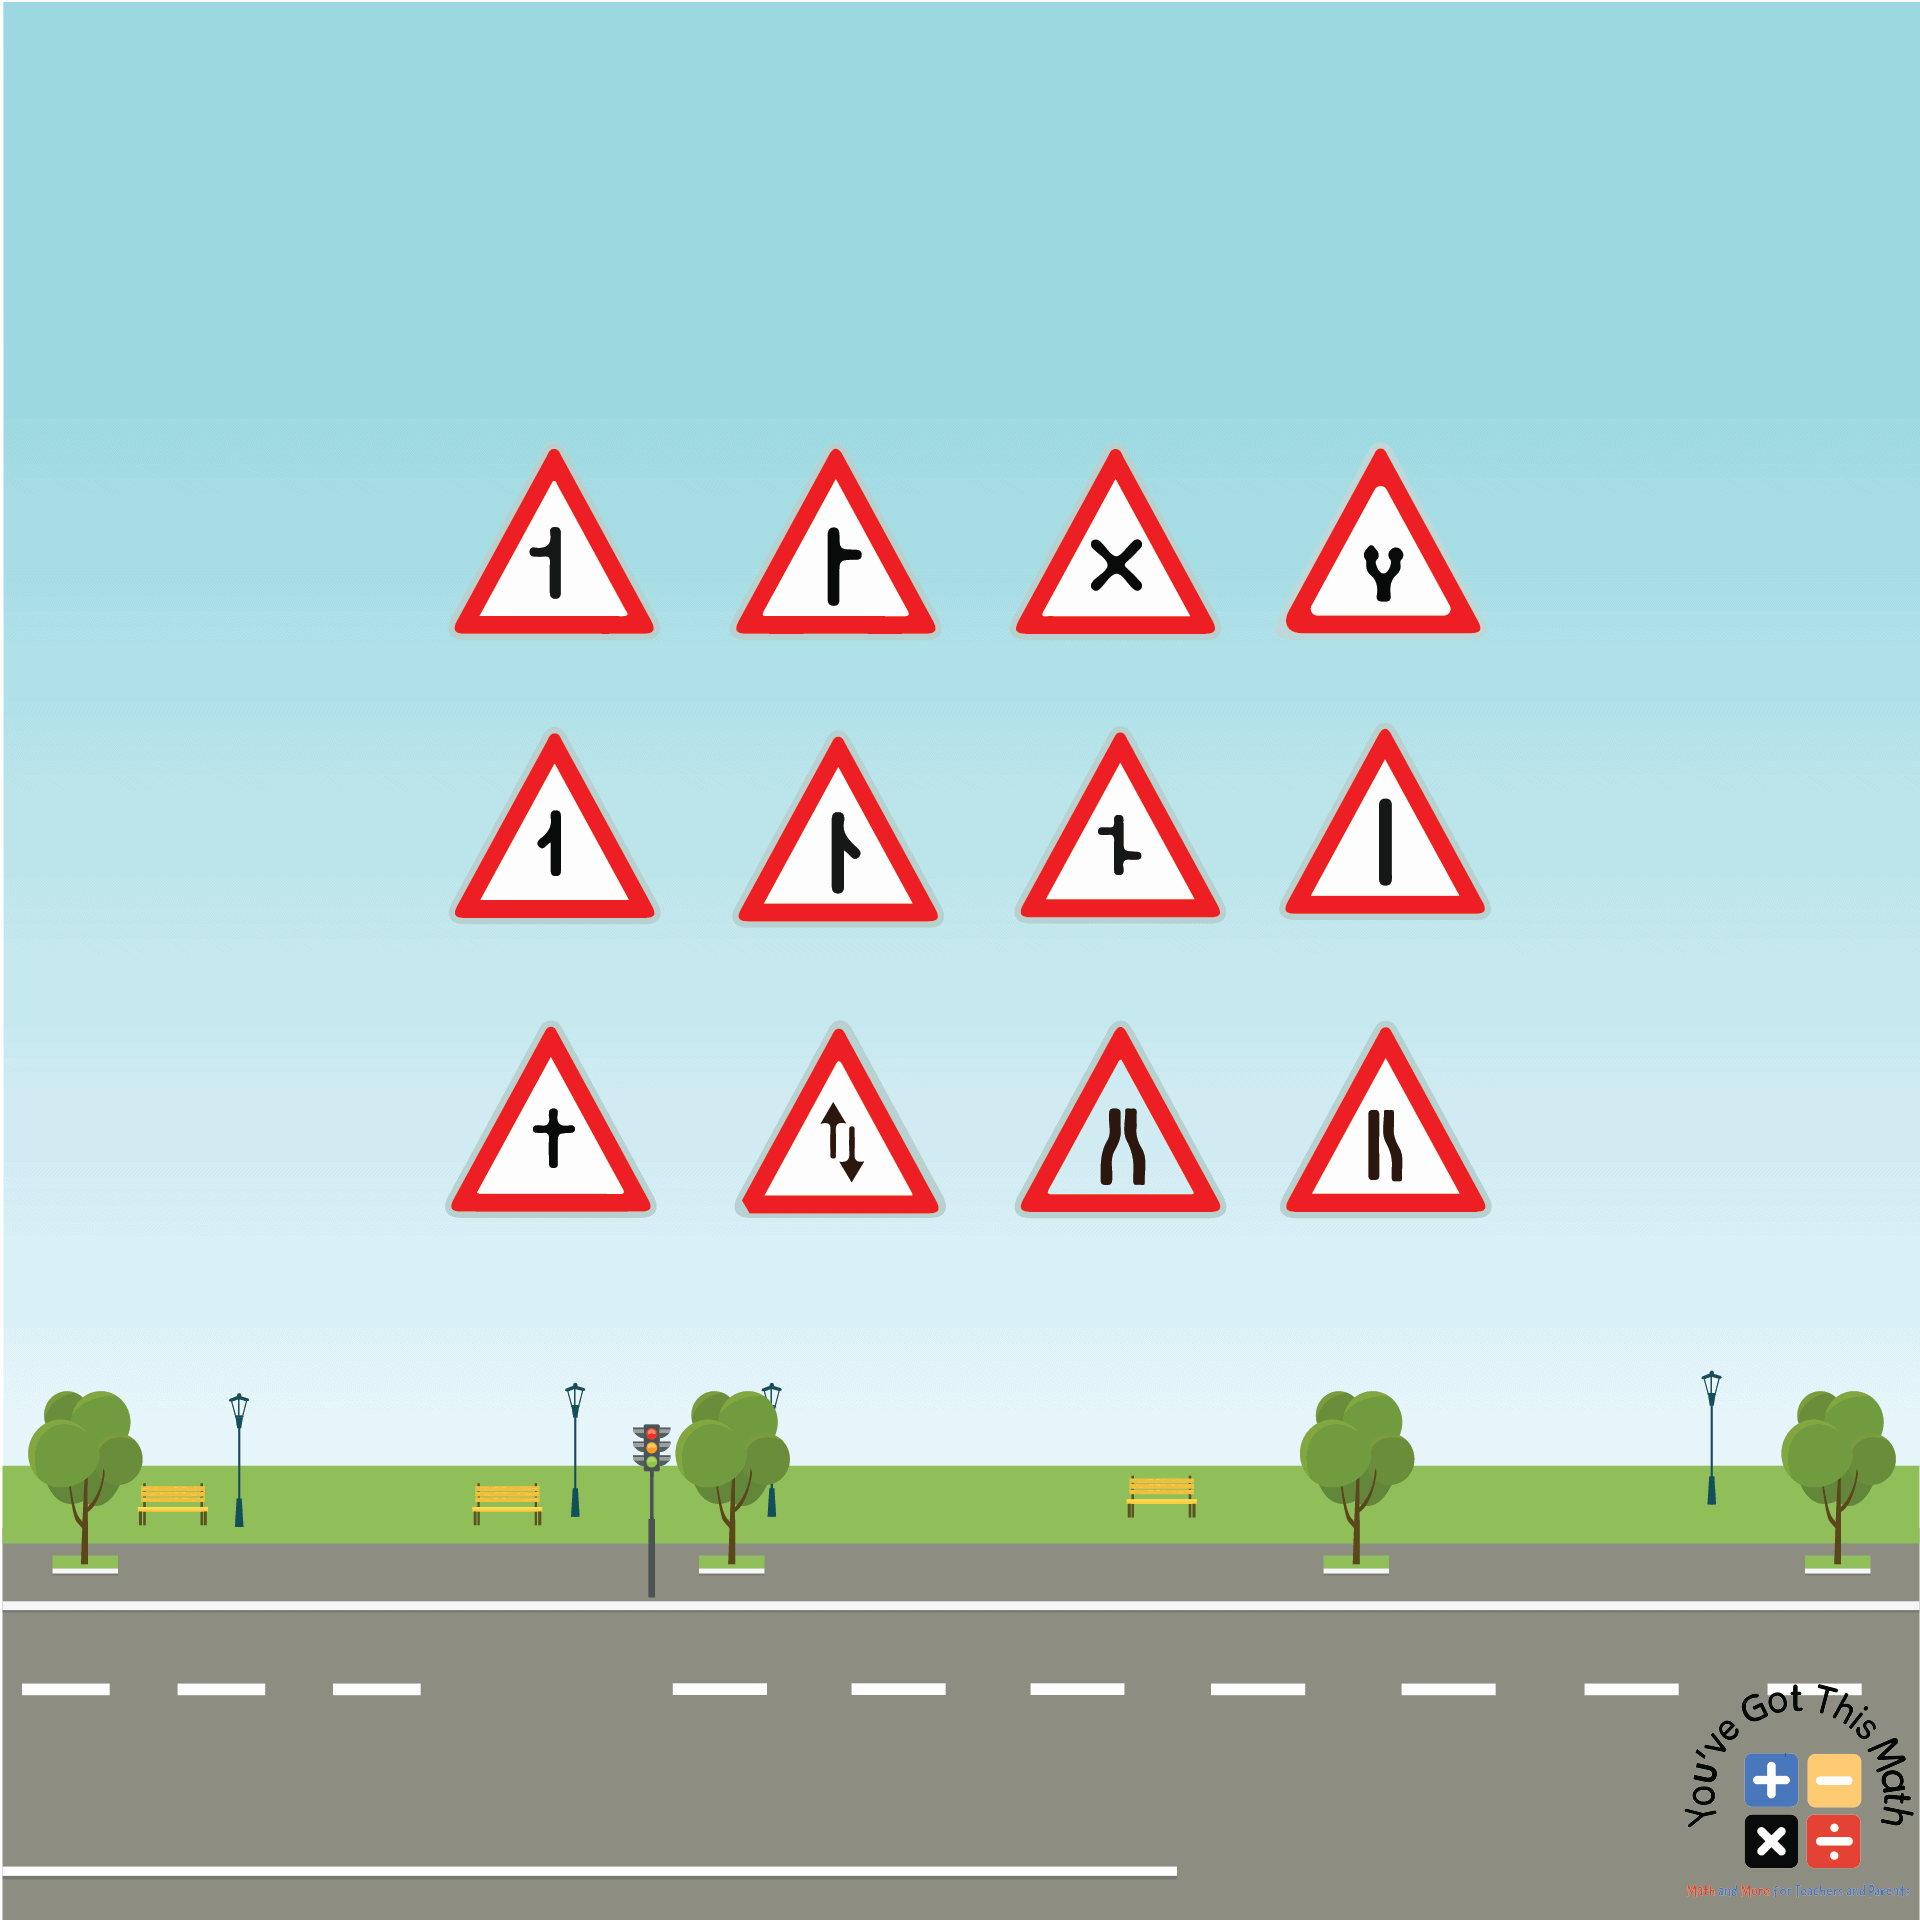 3 - Traffic signs to show equilateral triangle in real life.